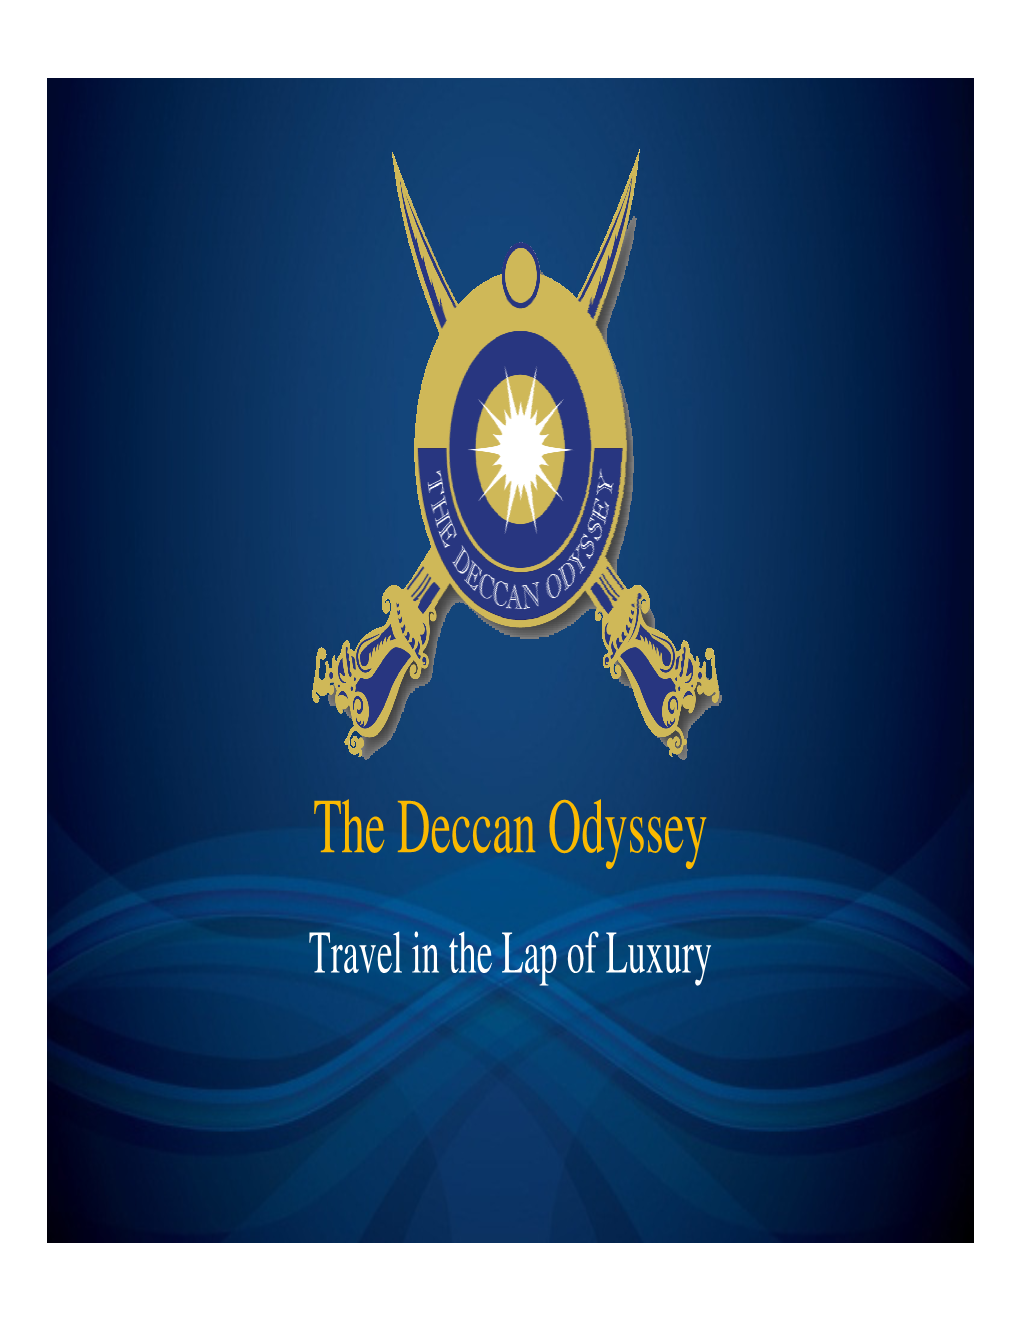 The Deccan Odyssey Travel in the Lap of Luxury the Deccan Odyssey